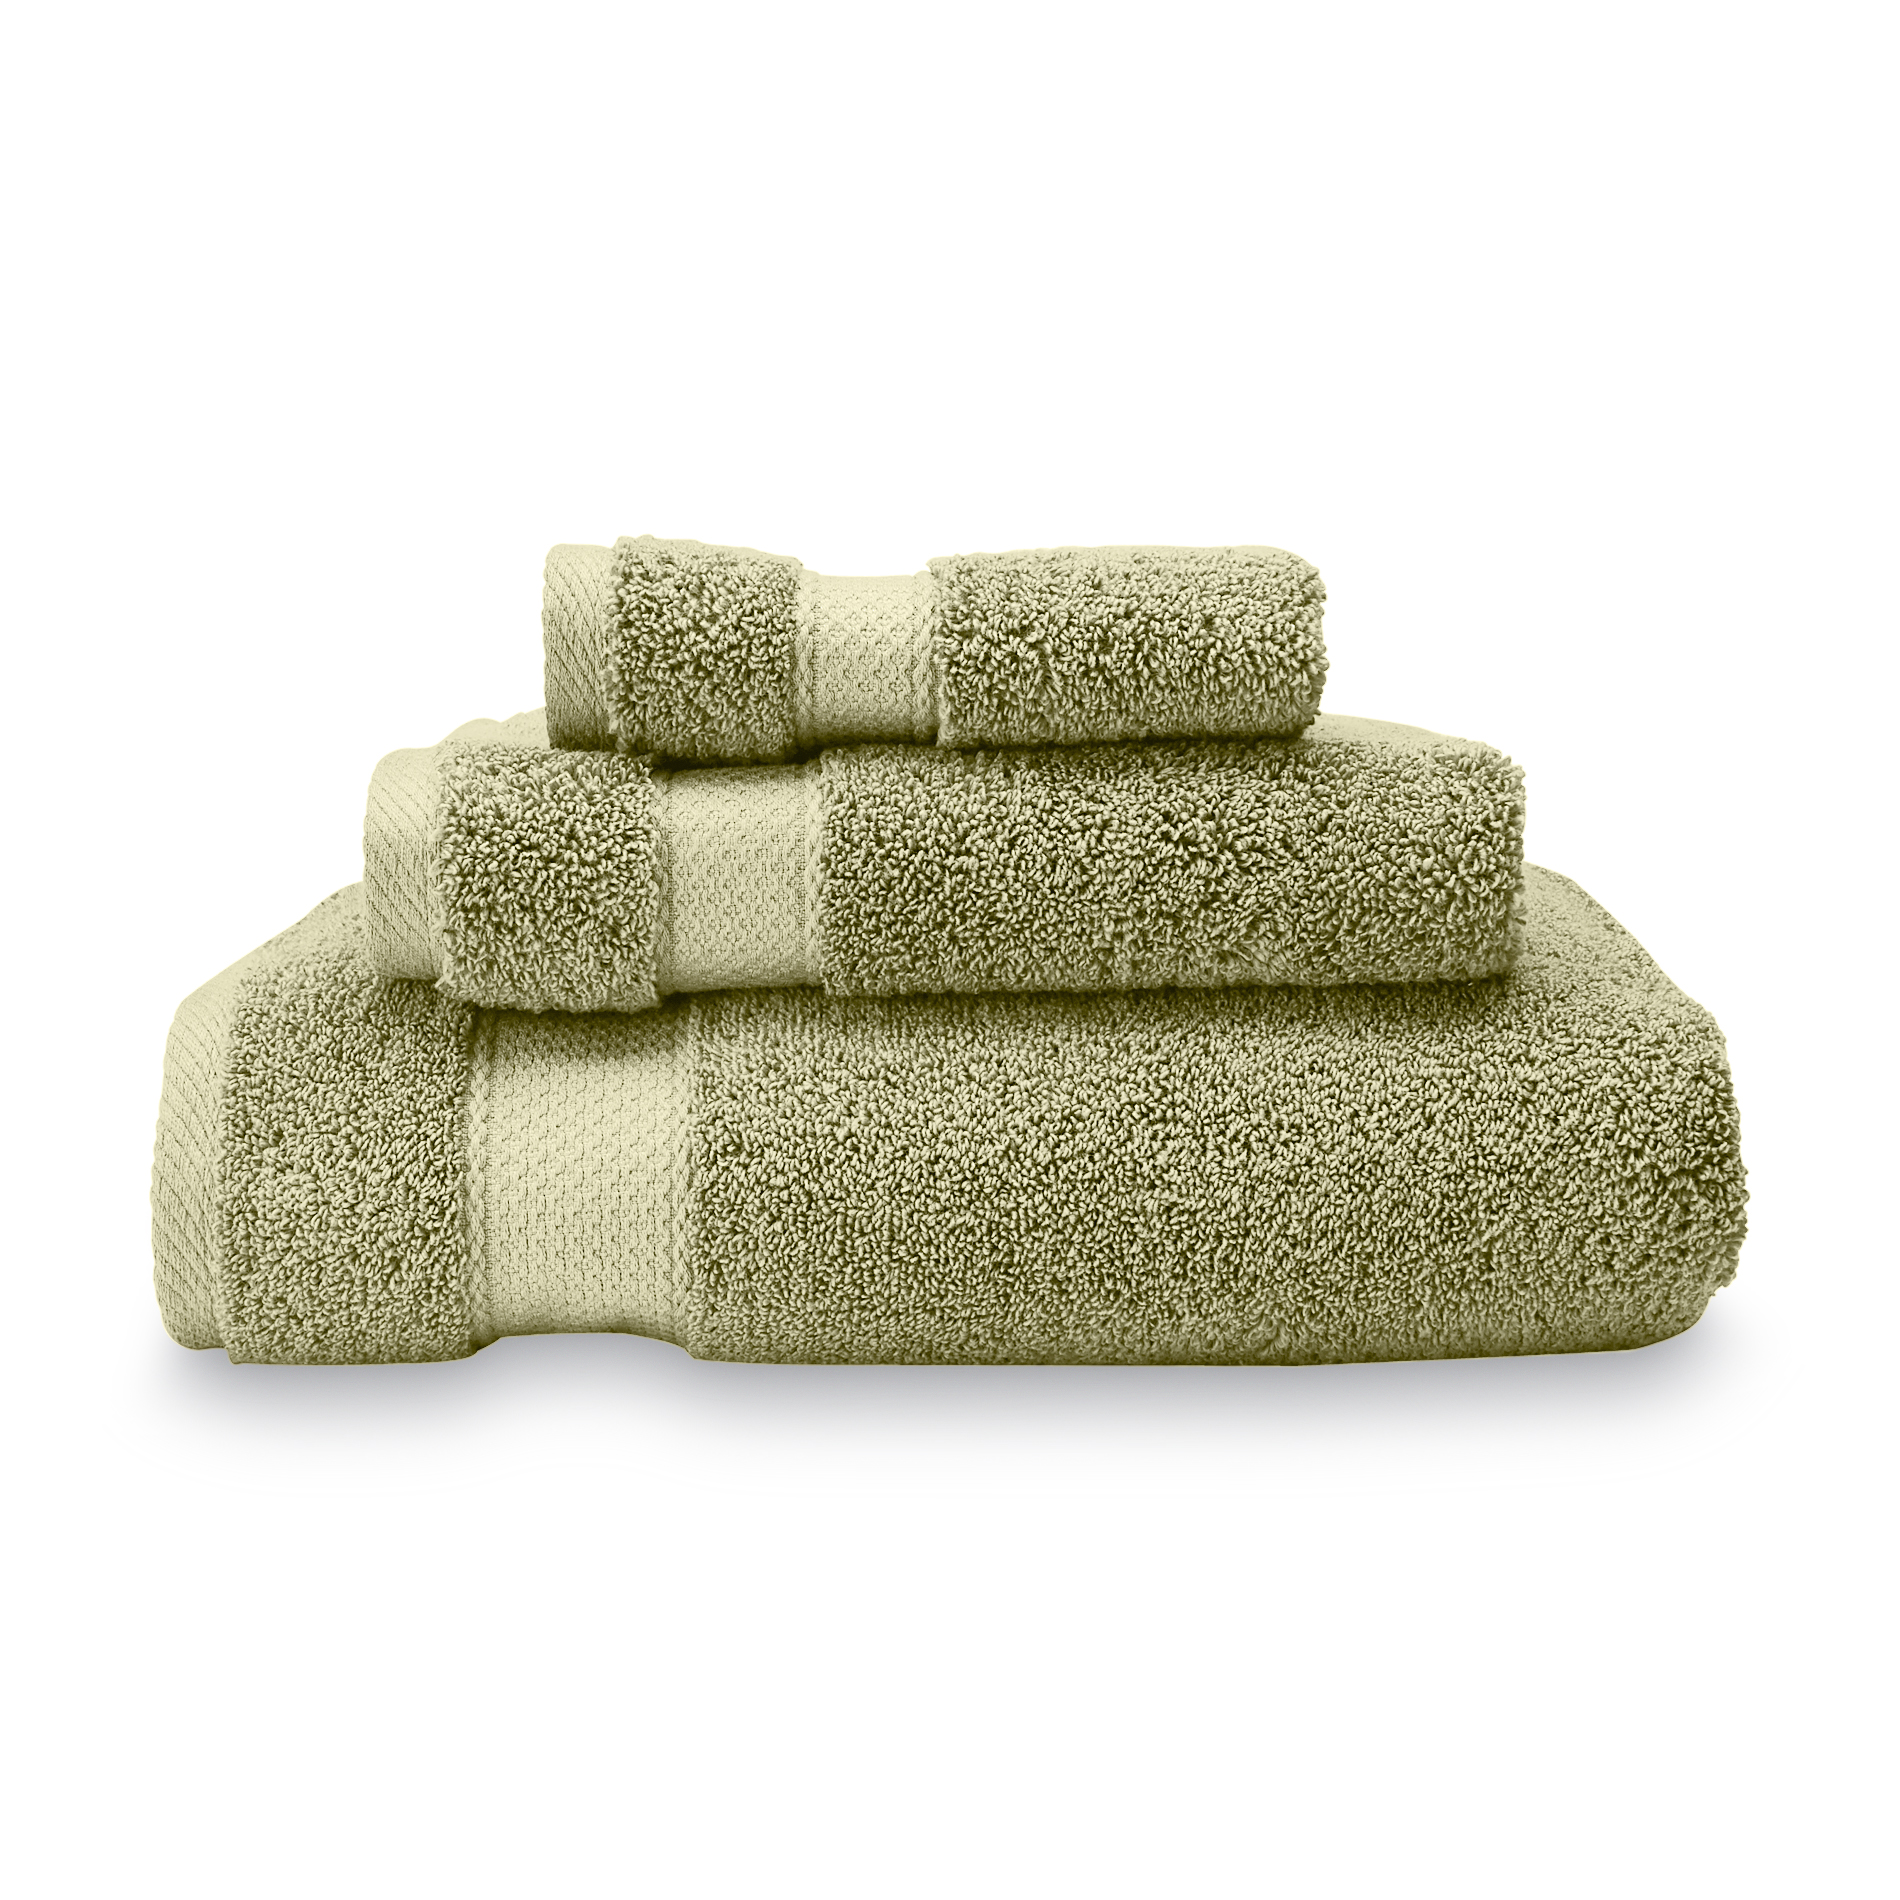 Egyptian Cotton Bath Towels  Hand Towels or Washcloths